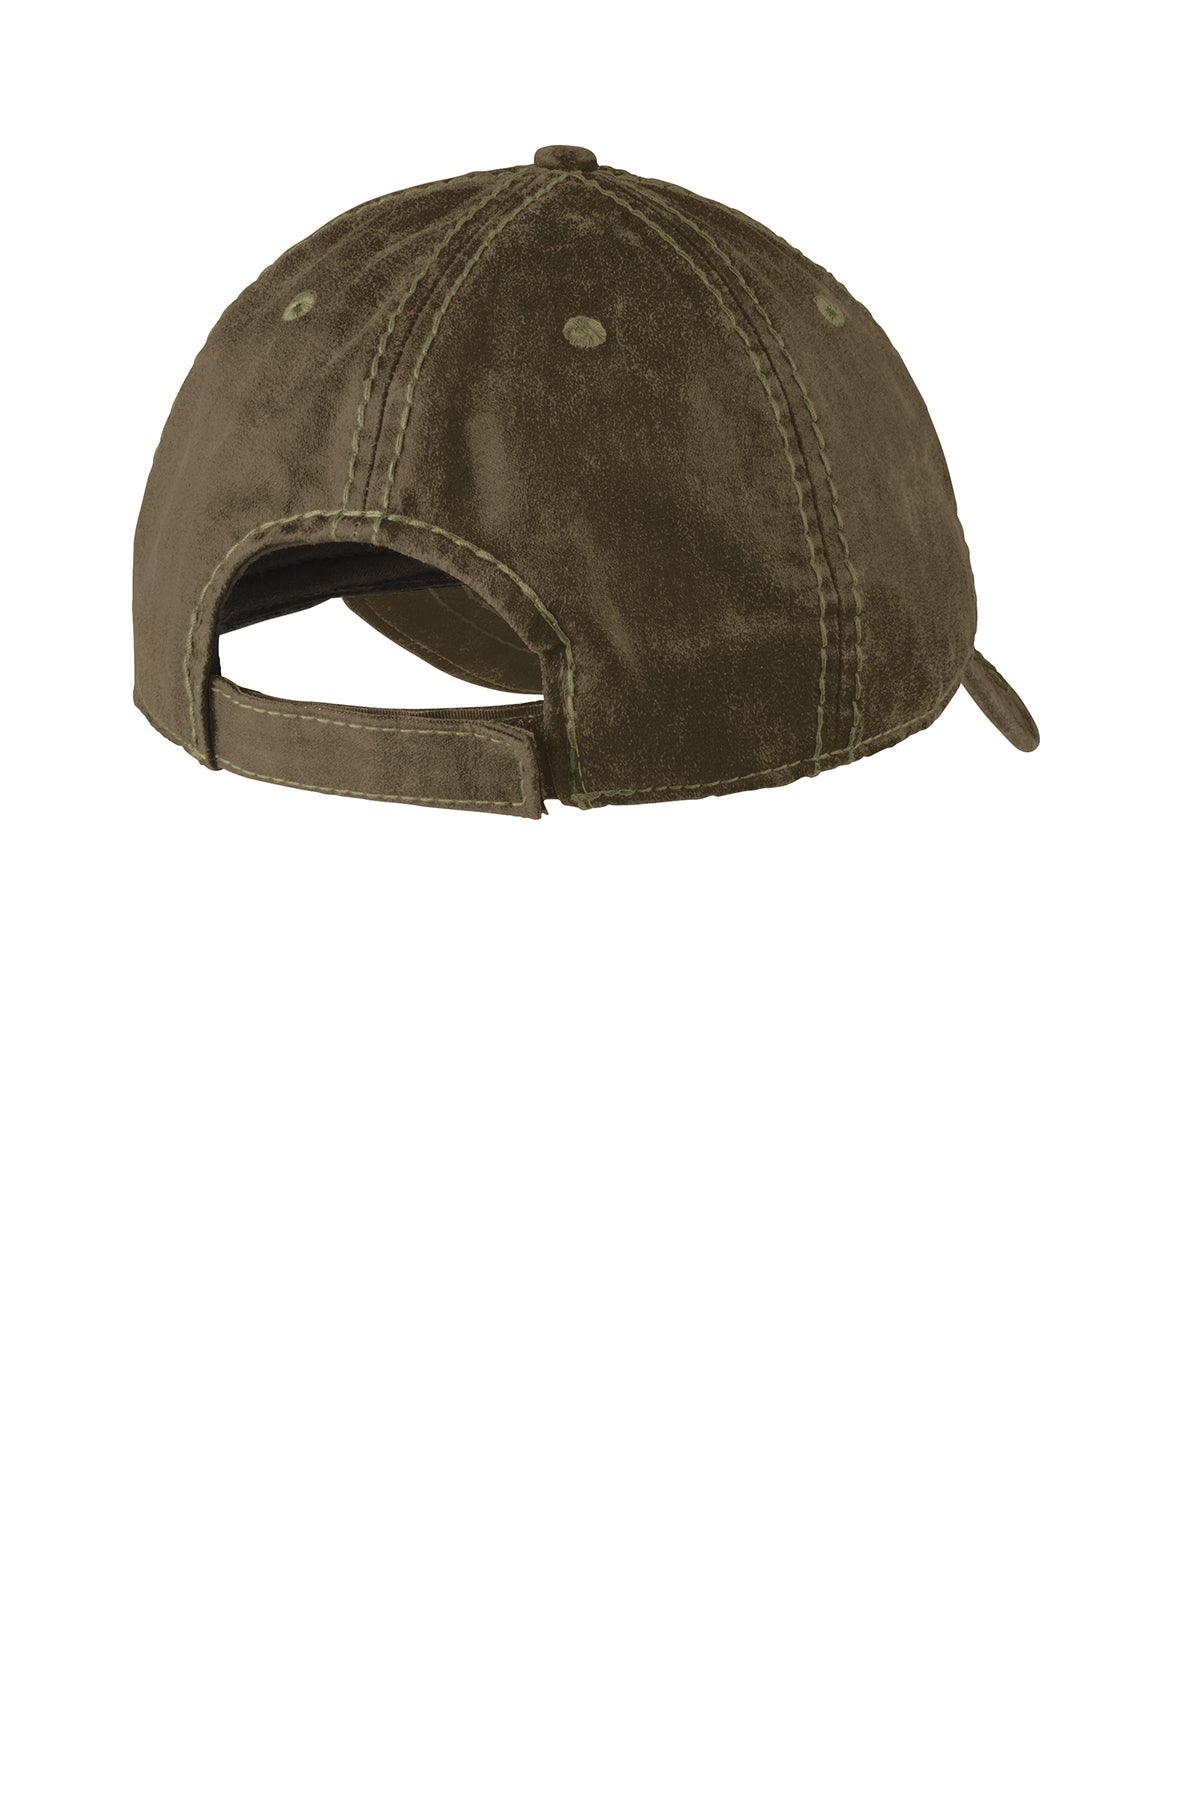 Port Authority Pigment Print Customized Distressed Caps, Brown